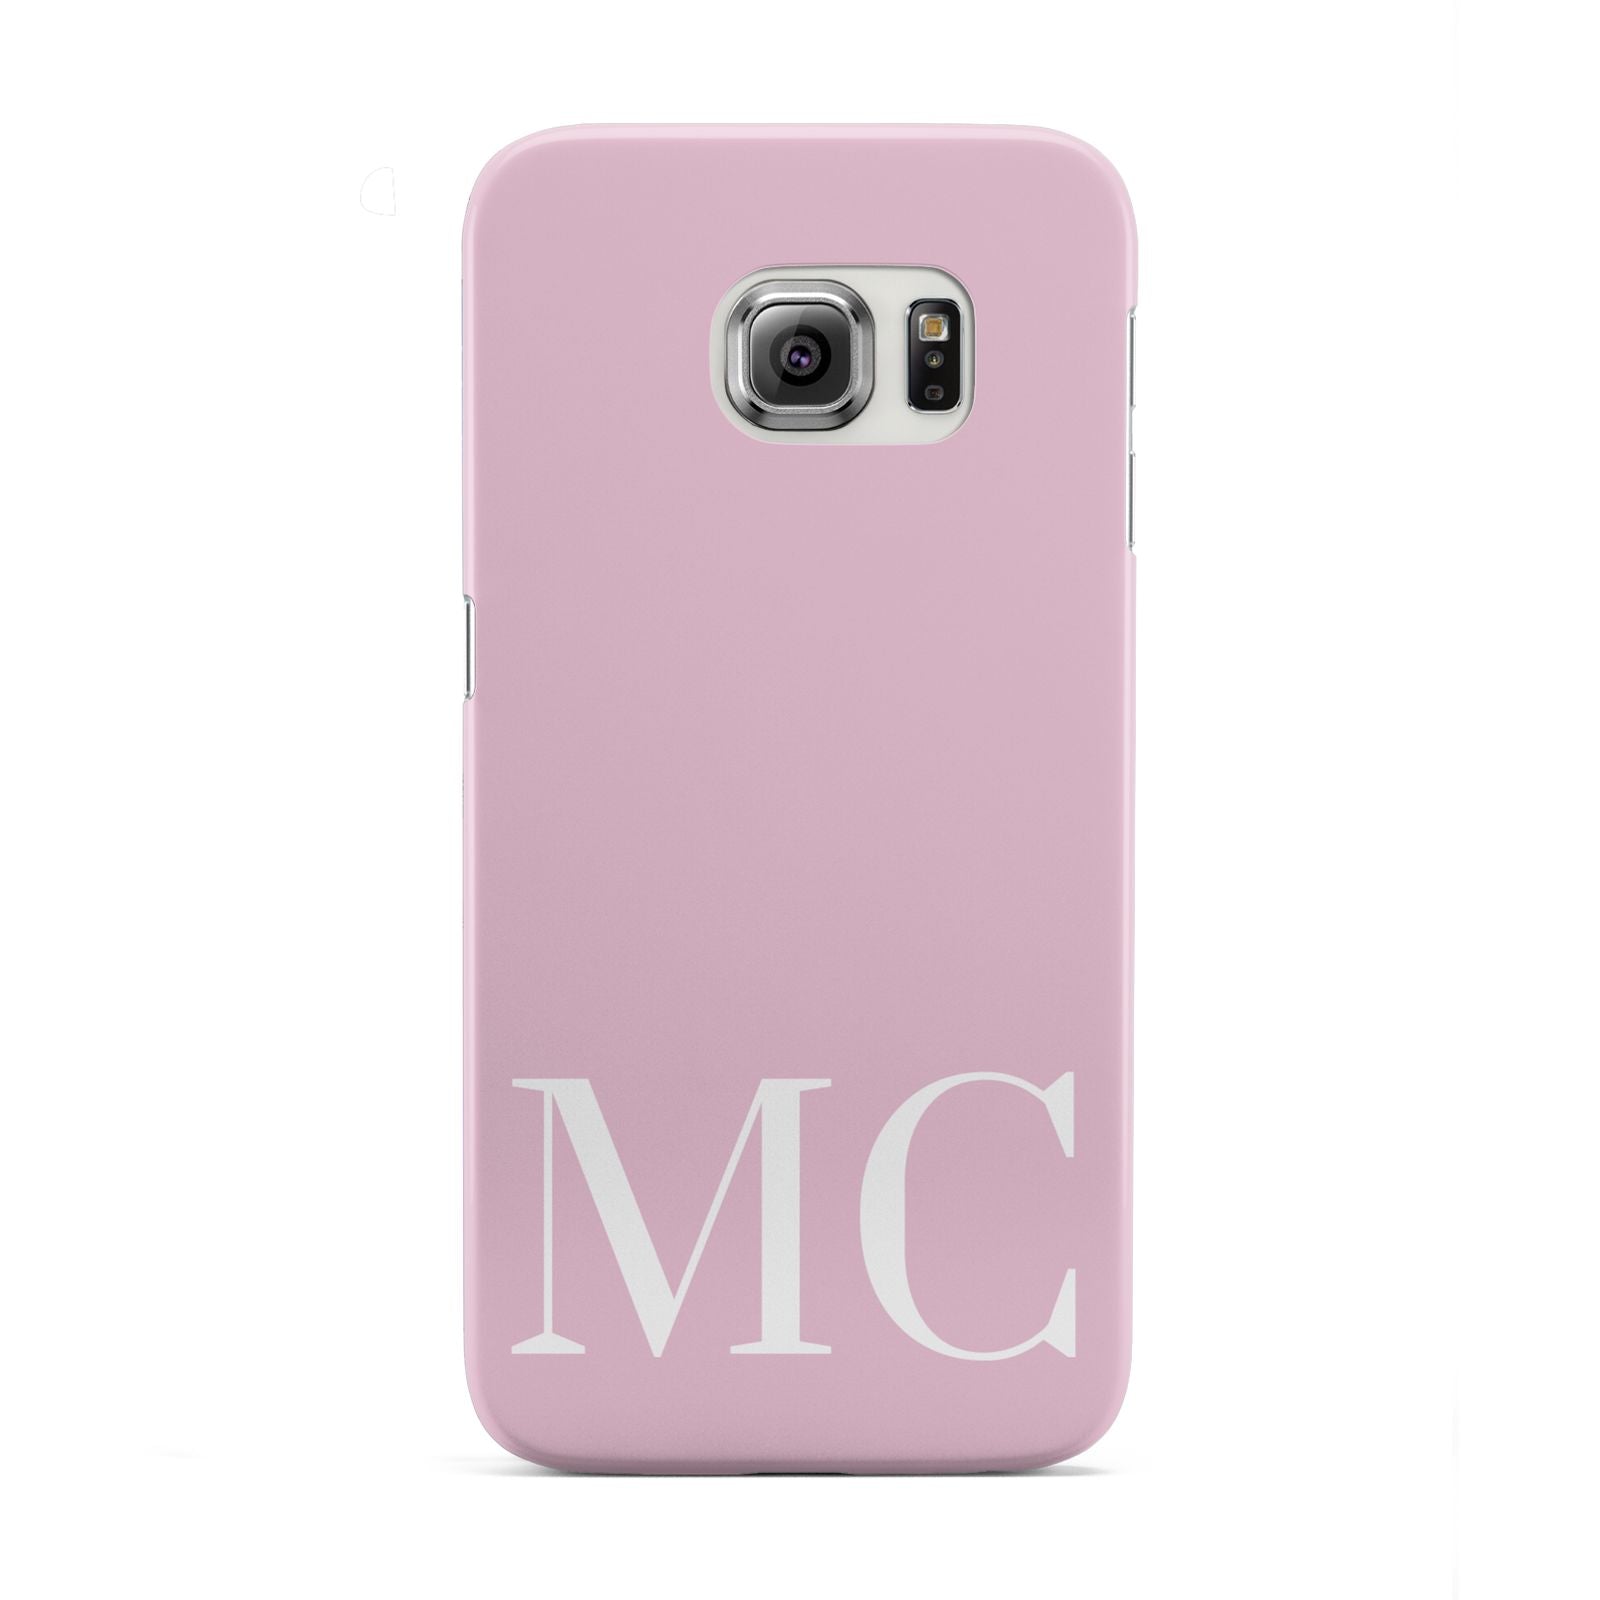 Initials Personalised 2 Samsung Galaxy S6 Edge Case